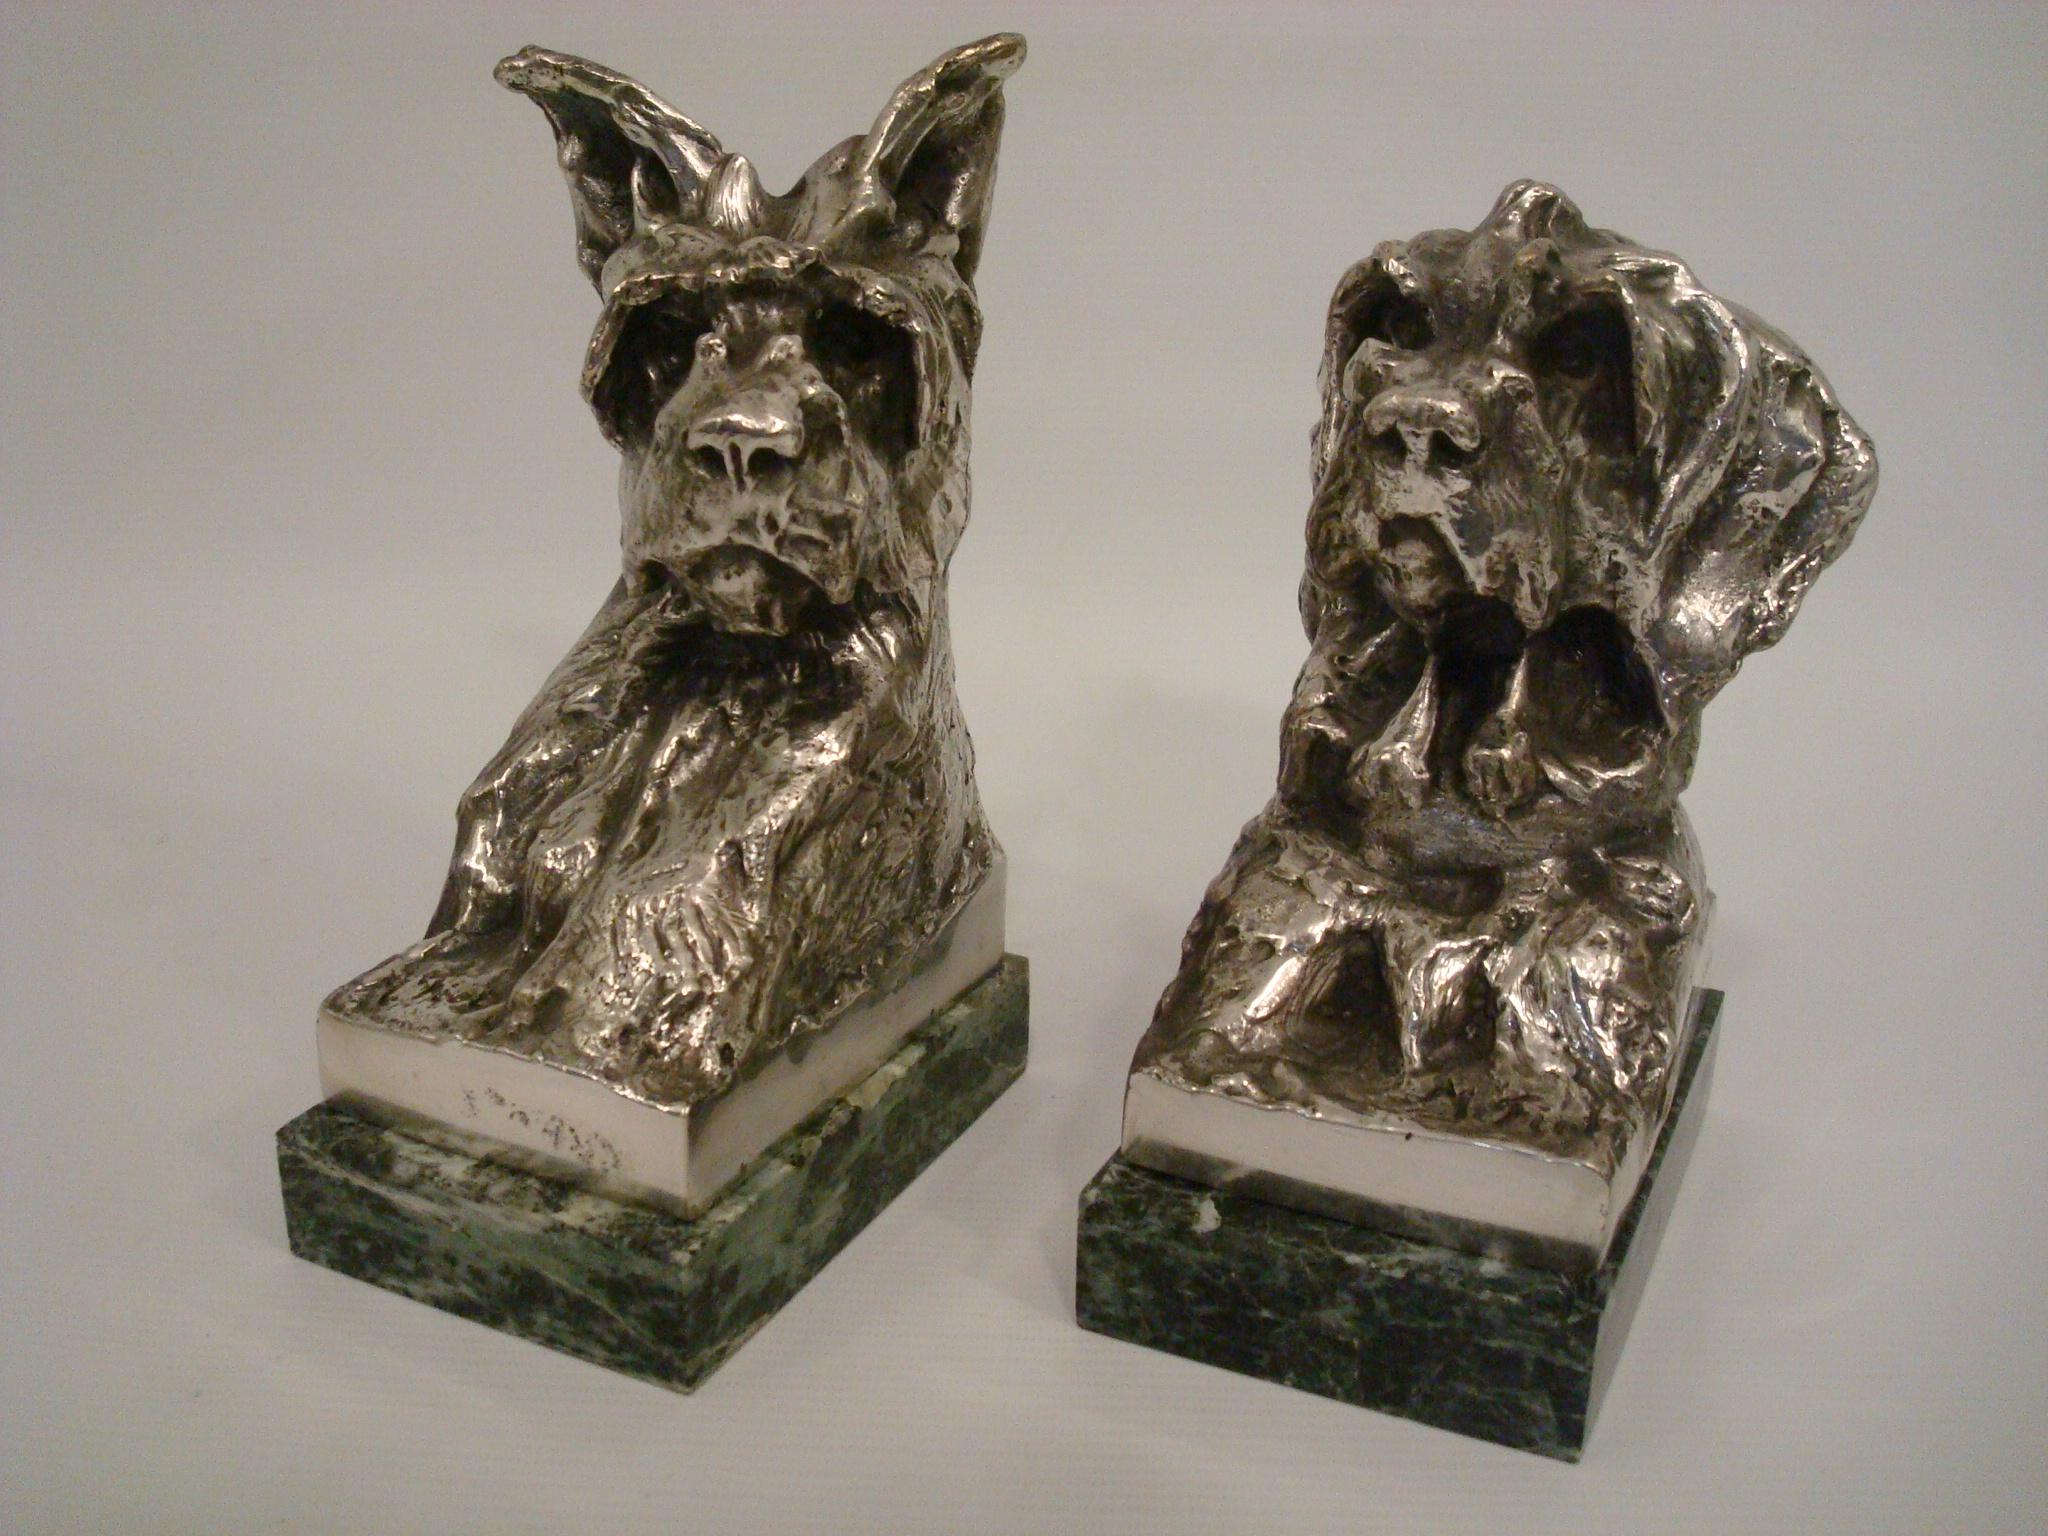 20th Century Art Deco Silvered Bronze Sculpture Terrier Dog Bust Bookends M. Louis Fiot, 1920 For Sale